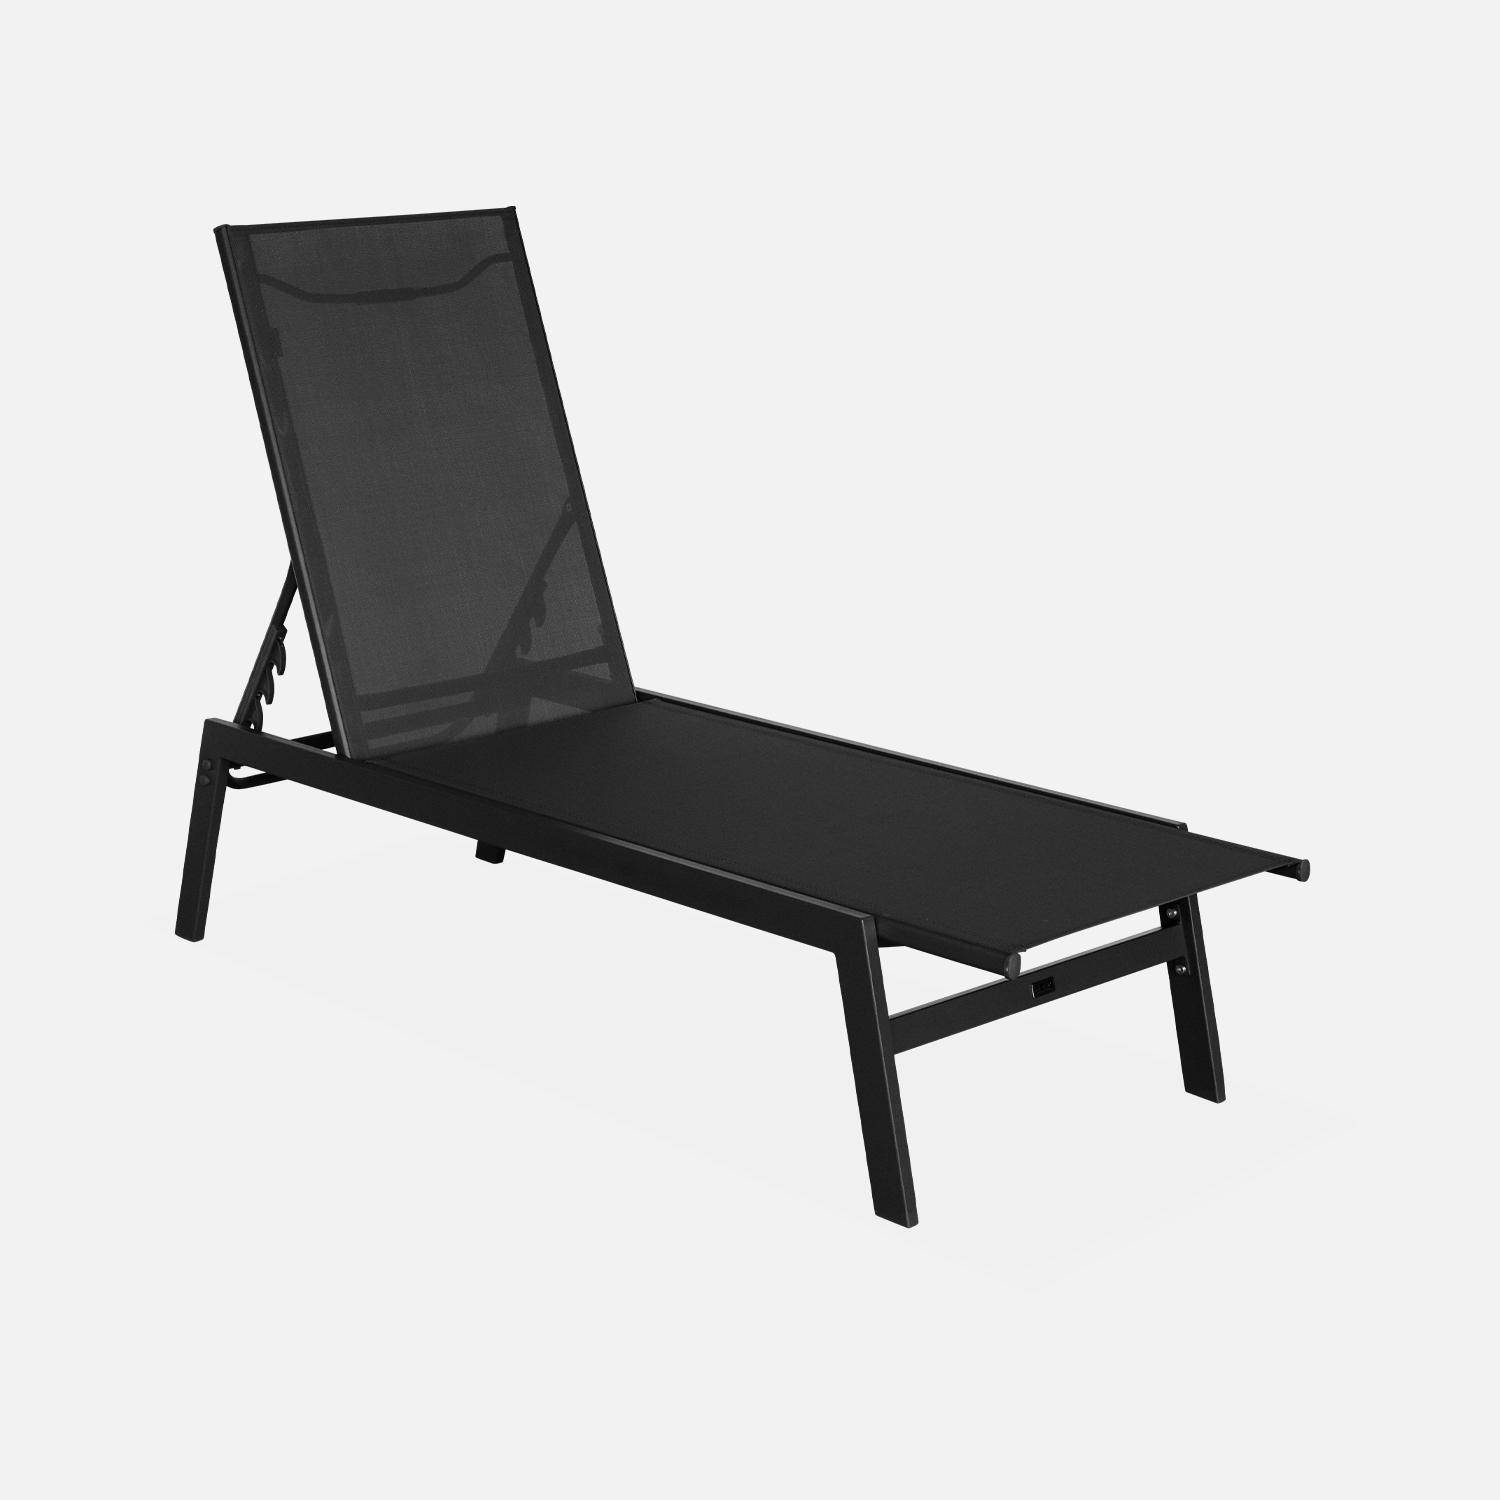 Pair of Textilene and Metal Multi-Position Sun Loungers, Black Photo4